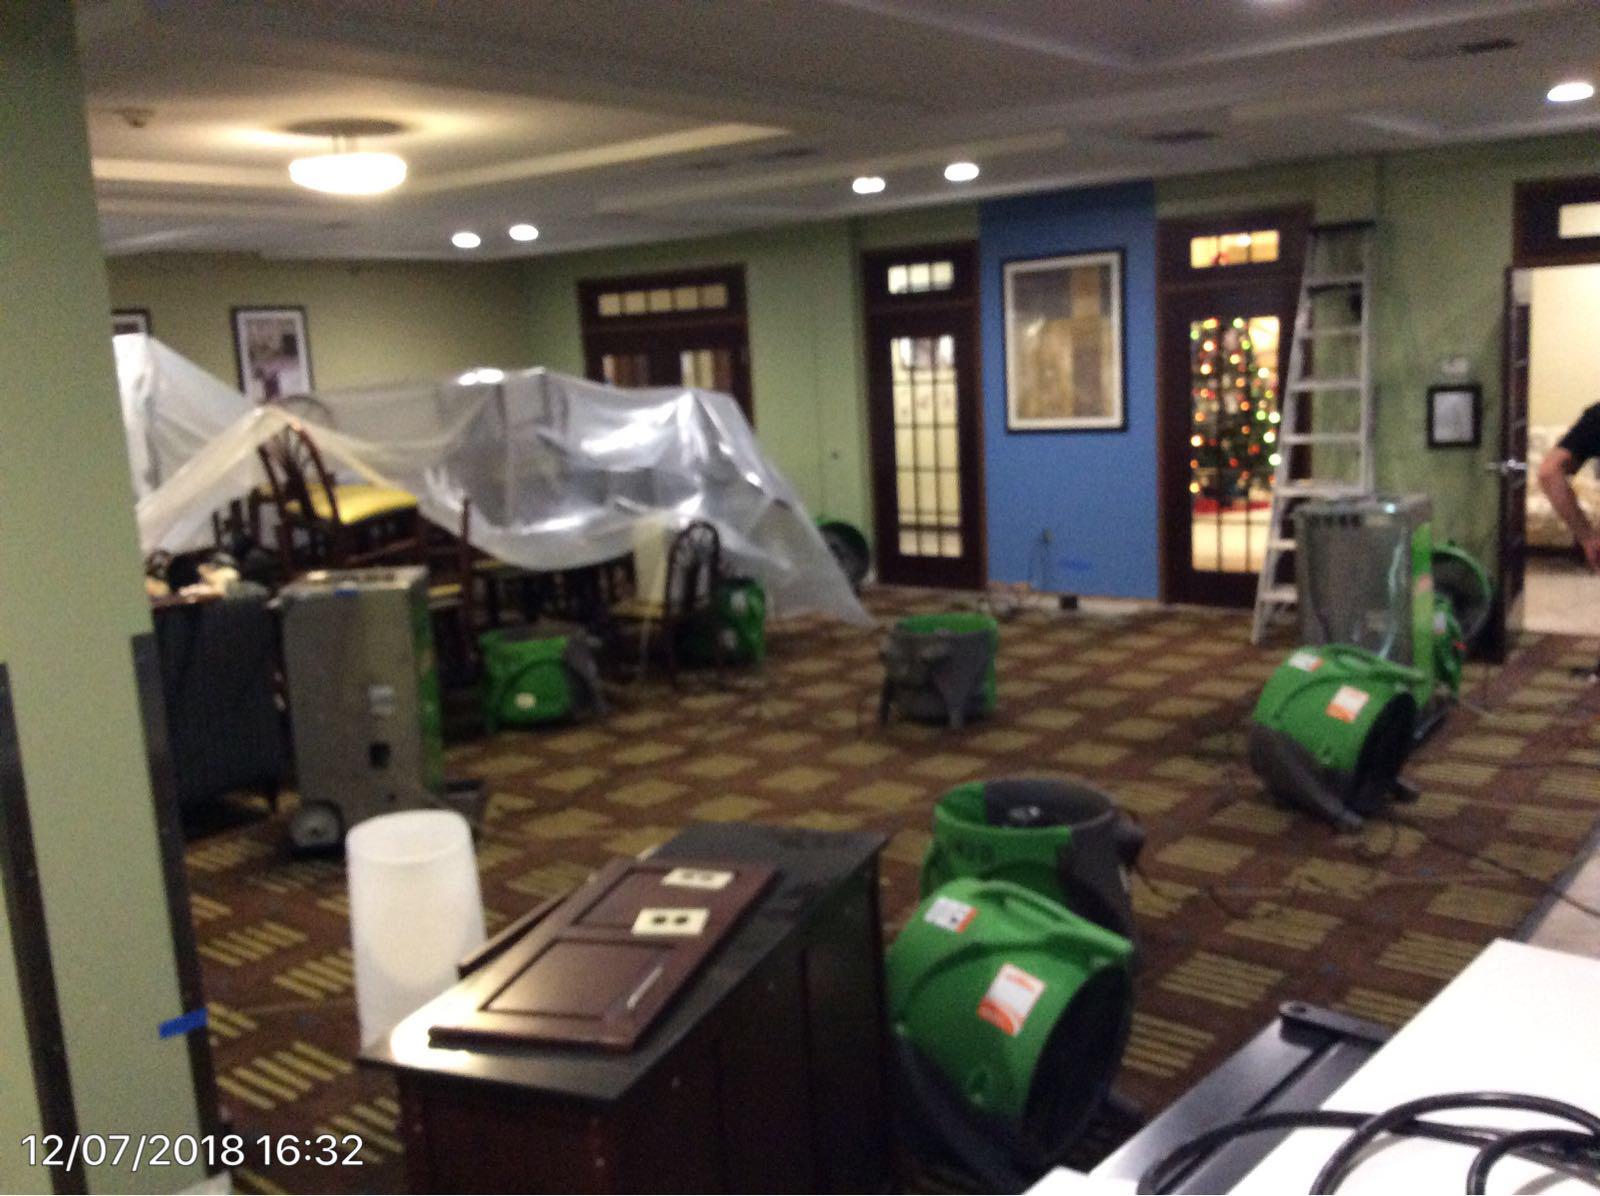 The owner of this Holiday Inn called us for water mitigation services after a sprinkler malfuntion.